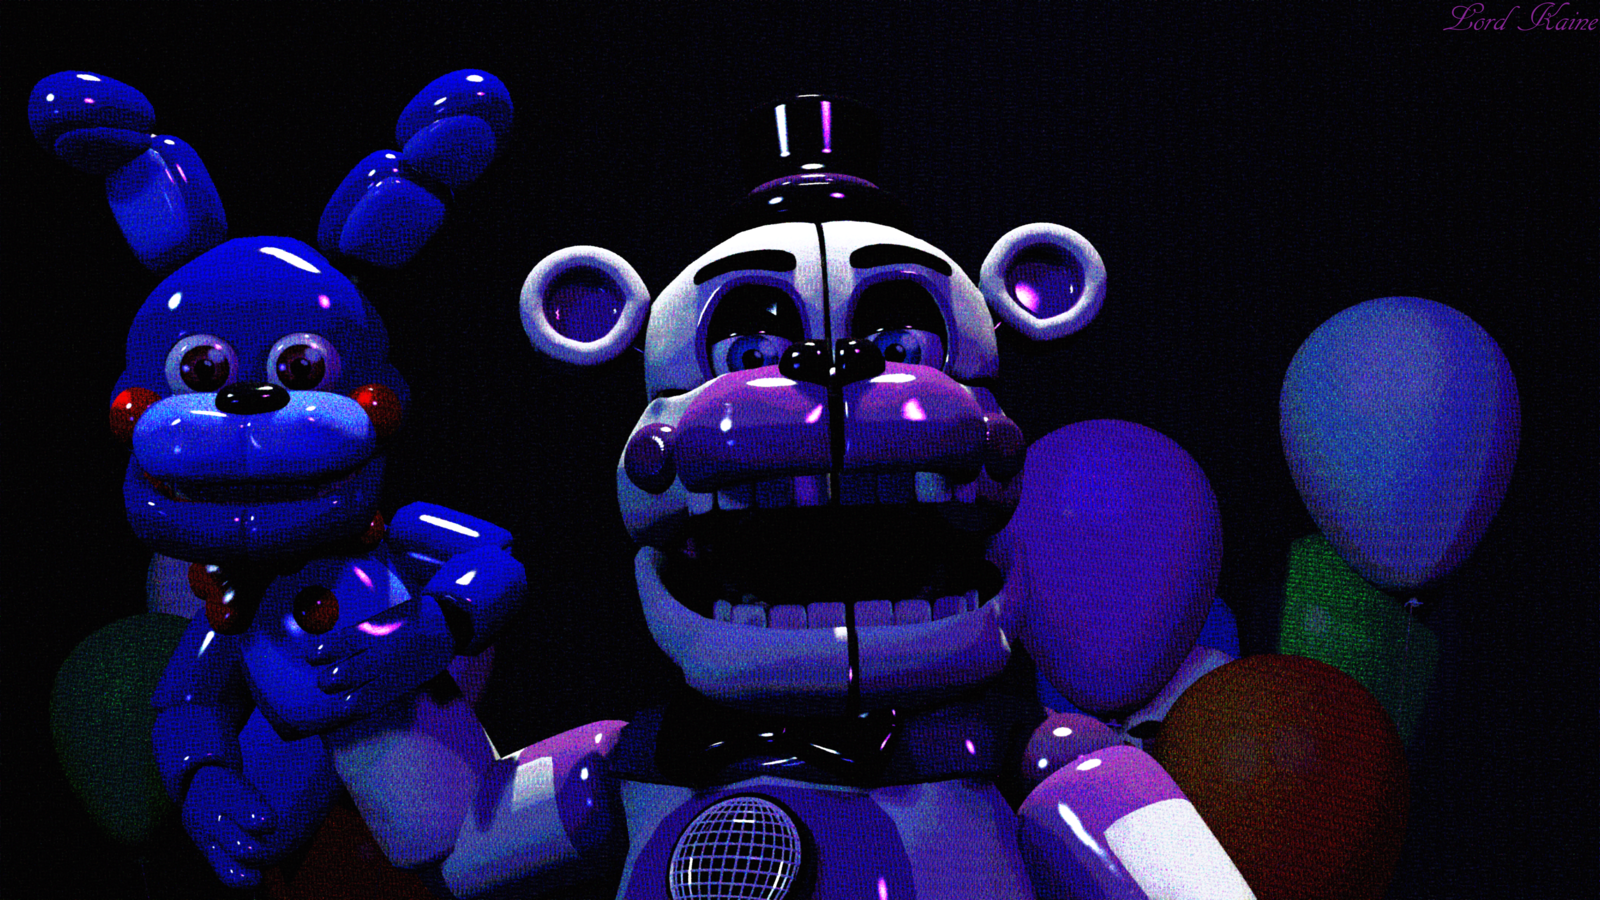 Free download picture of funtime freddy Ecosia 1600x900 for your Desktop, M...